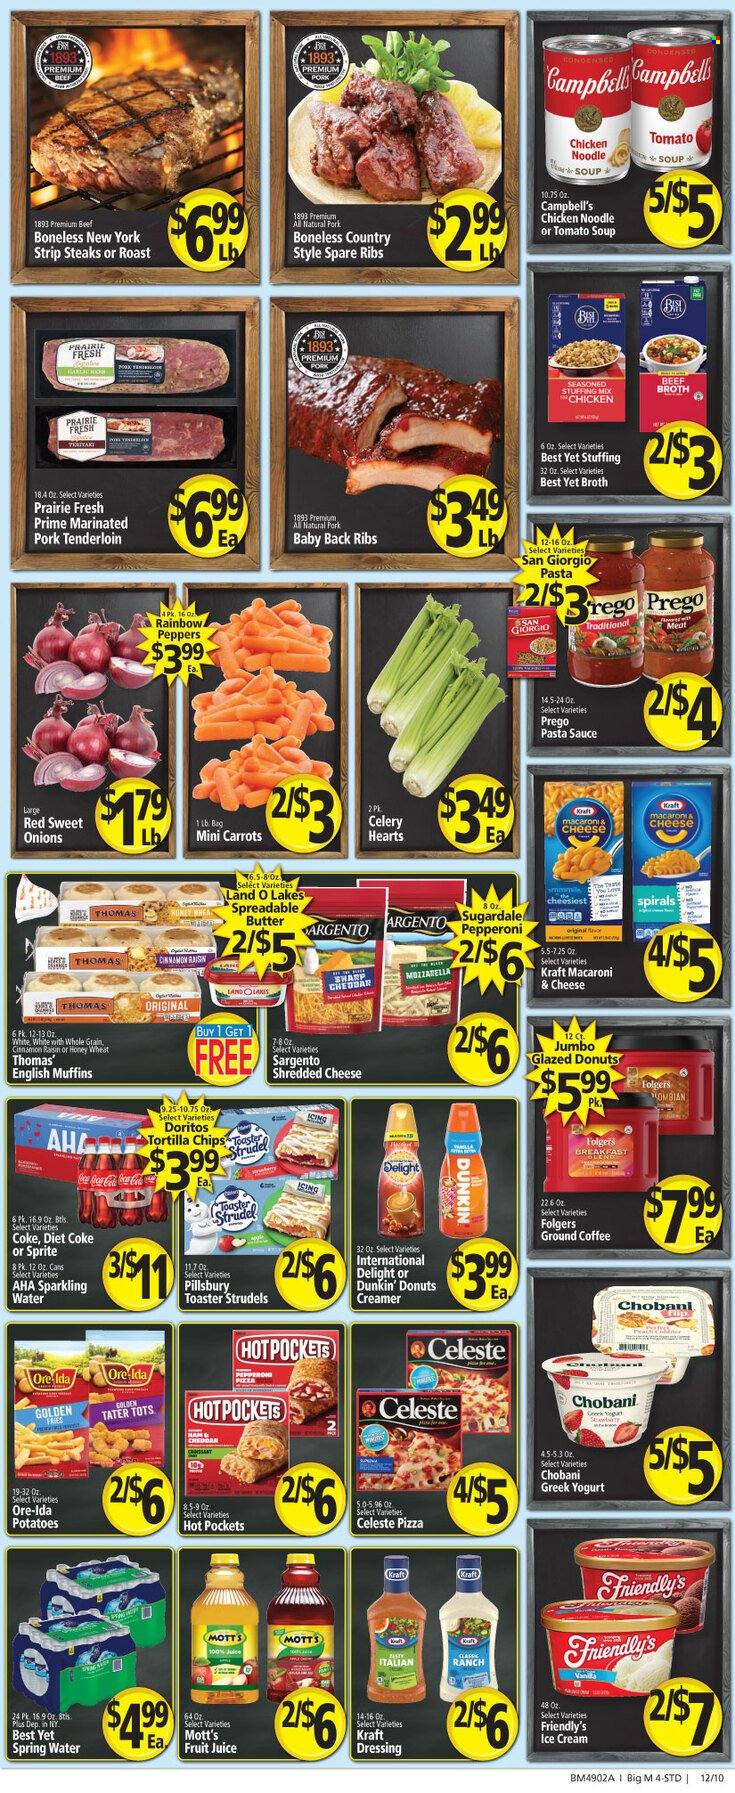 thumbnail - Big M Flyer - 12/02/2022 - 12/08/2022 - Sales products - english muffins, strudel, donut, Dunkin' Donuts, carrots, celery, potatoes, peppers, sleeved celery, Mott's, Campbell's, macaroni & cheese, tomato soup, pizza, pasta sauce, soup, sauce, Pillsbury, noodles cup, noodles, Kraft®, Sugardale, pepperoni, shredded cheese, Sargento, greek yoghurt, yoghurt, Chobani, butter, spreadable butter, creamer, ice cream, Friendly's Ice Cream, potato fries, Ore-Ida, tater tots, Celeste, Doritos, tortilla chips, chips, beef broth, stuffing mix, broth, dressing, Coca-Cola, Sprite, juice, fruit juice, Diet Coke, spring water, sparkling water, coffee, Folgers, ground coffee, breakfast blend, beef meat, steak, striploin steak, pork meat, pork ribs, pork tenderloin, pork spare ribs, pork back ribs, marinated pork. Page 2.